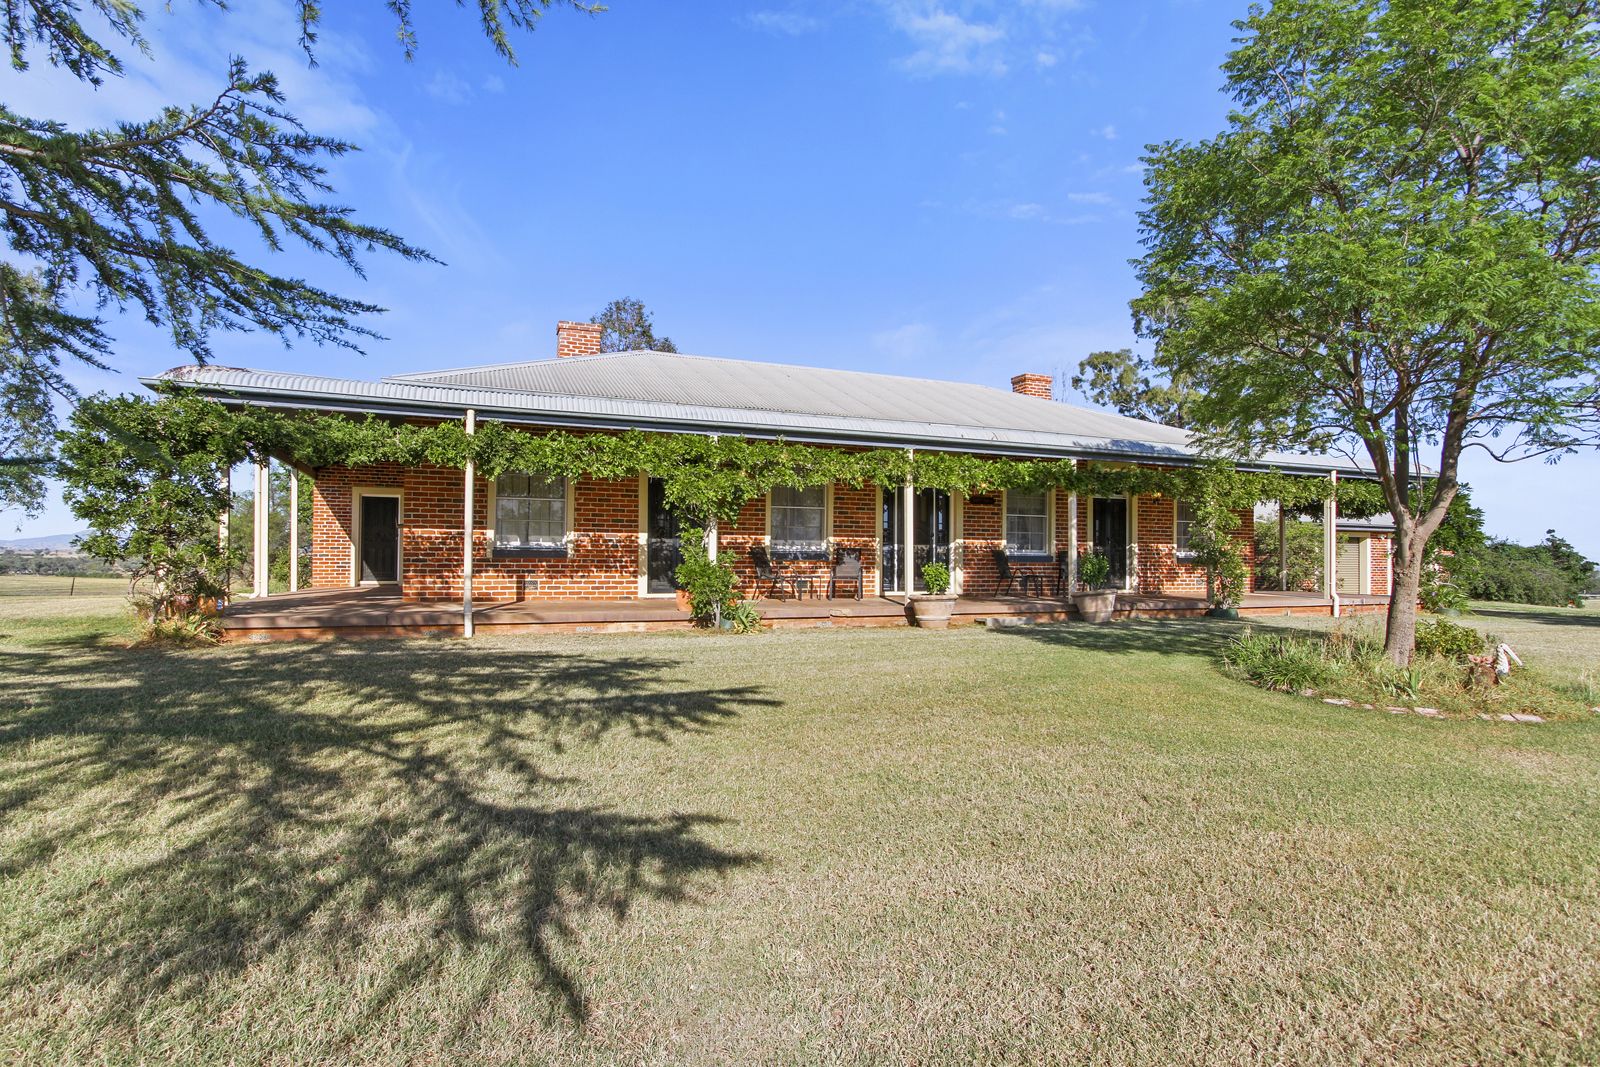 14 Soldiers Settlement Road, Bective NSW 2340